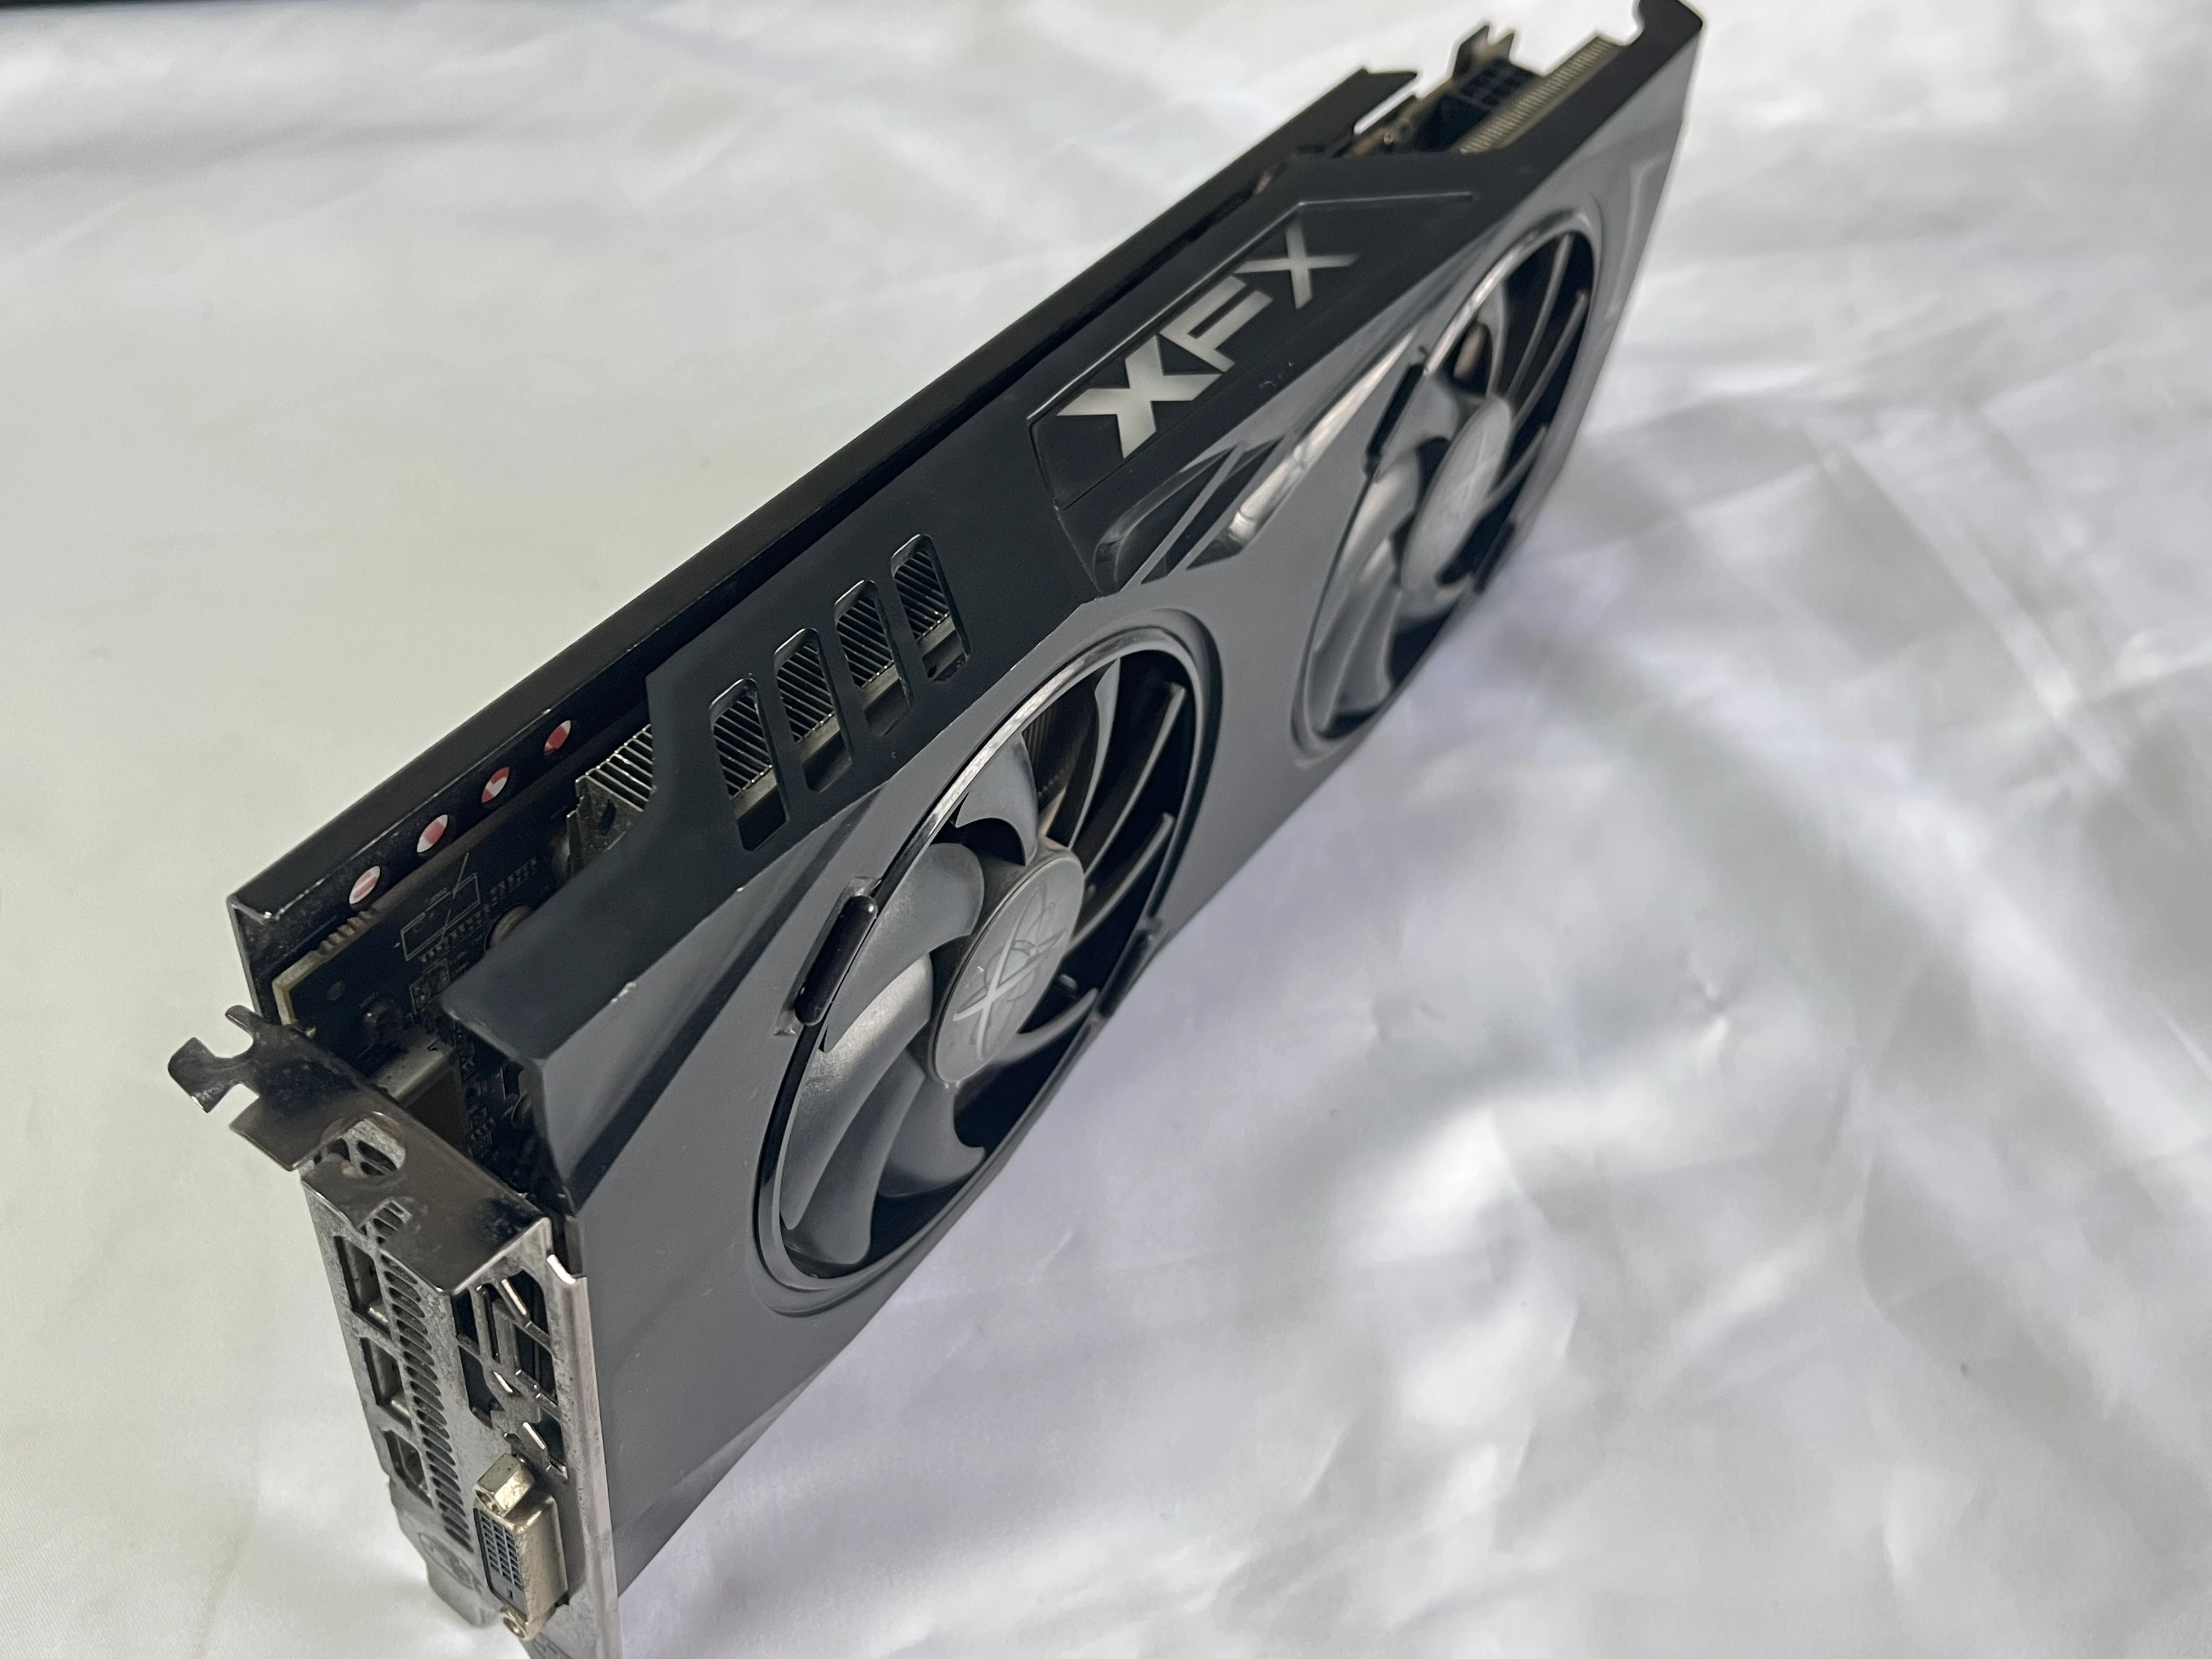 LUCBIT Used XFX RX 580 8GB Graphic Card Eth Mining Machine rx580 8gb RX588 for game or mining rig images - 6